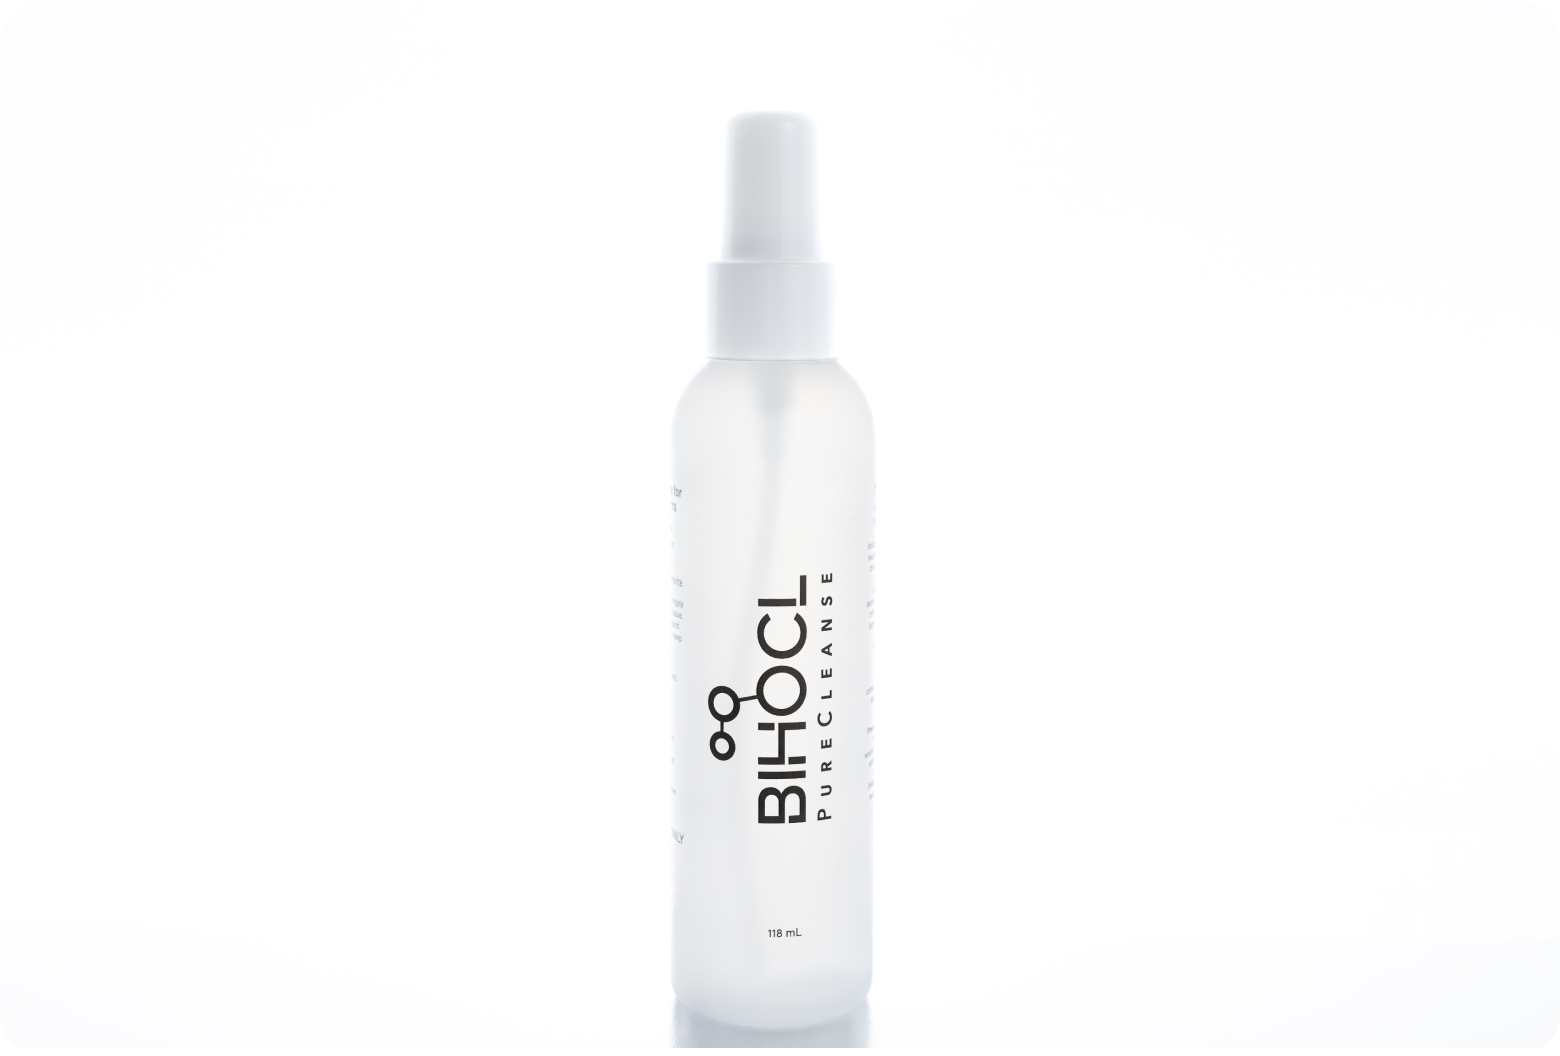 BIHOCL PureCleanse wound cleanser on a white background